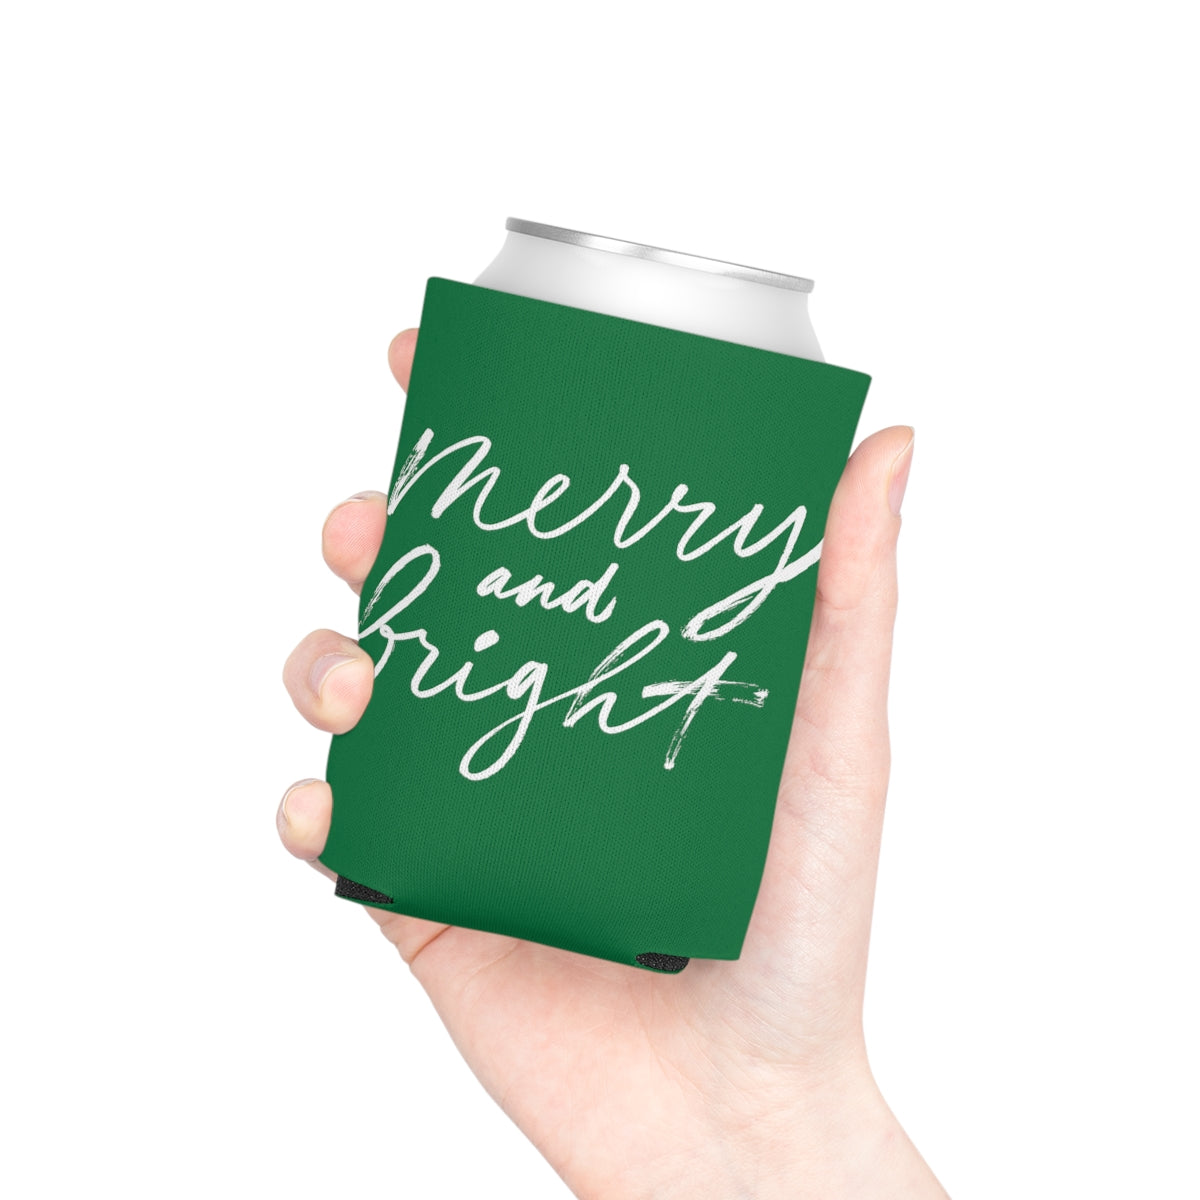 Green Christmas  Can Cooler